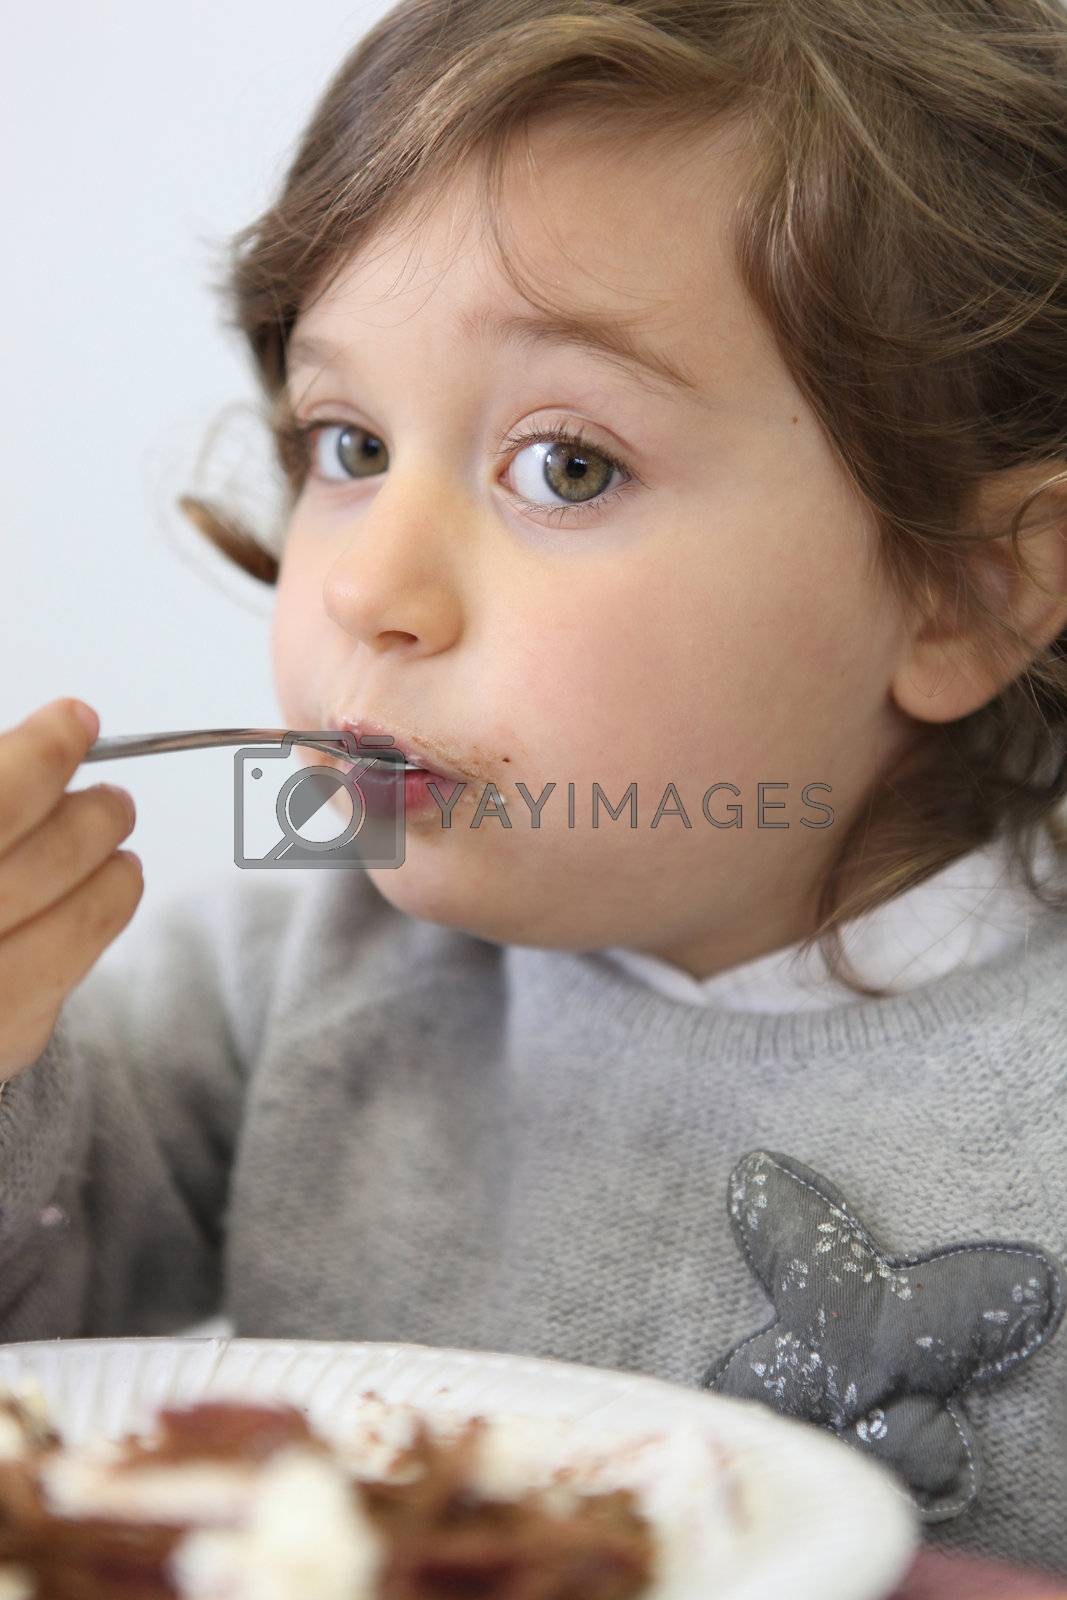 Royalty free image of Portrait of a little girl eating by phovoir